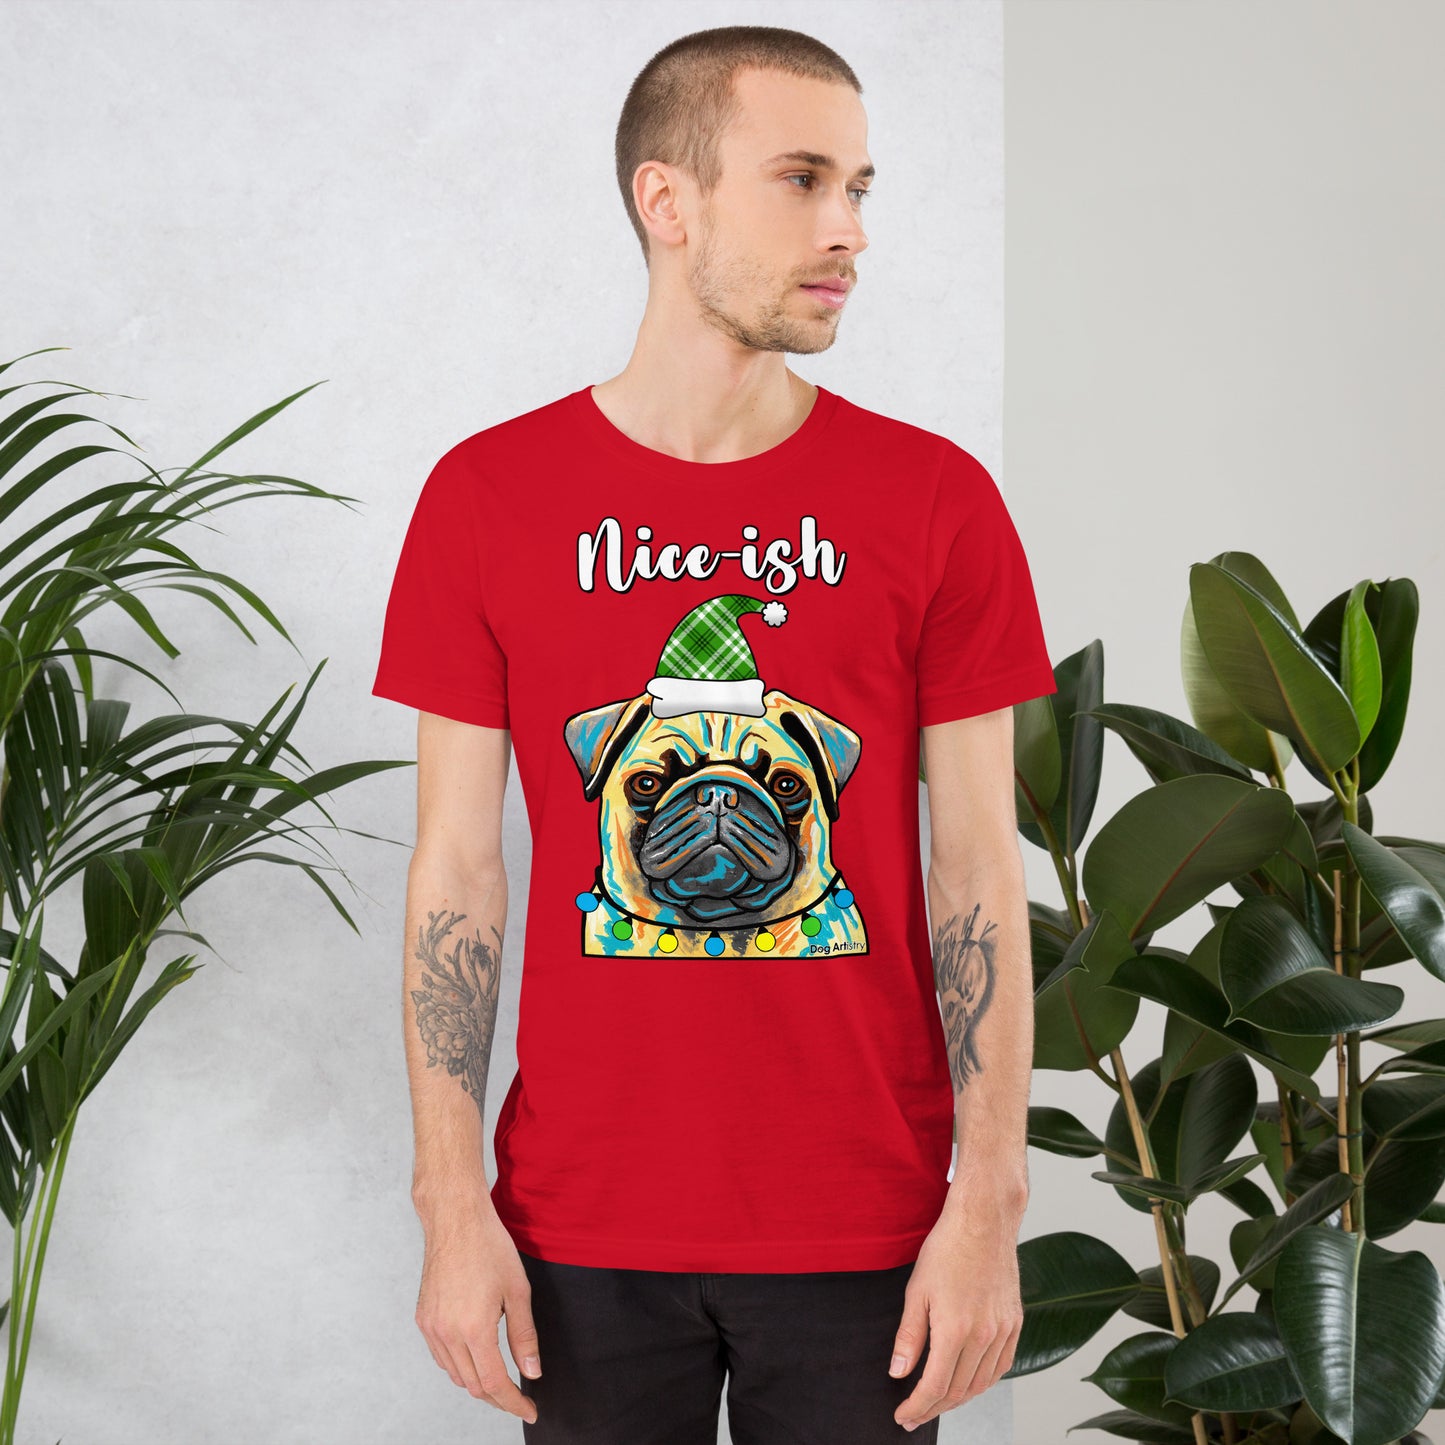 Nice-ish Pug holiday unisex t-shirt red by Dog Artistry.